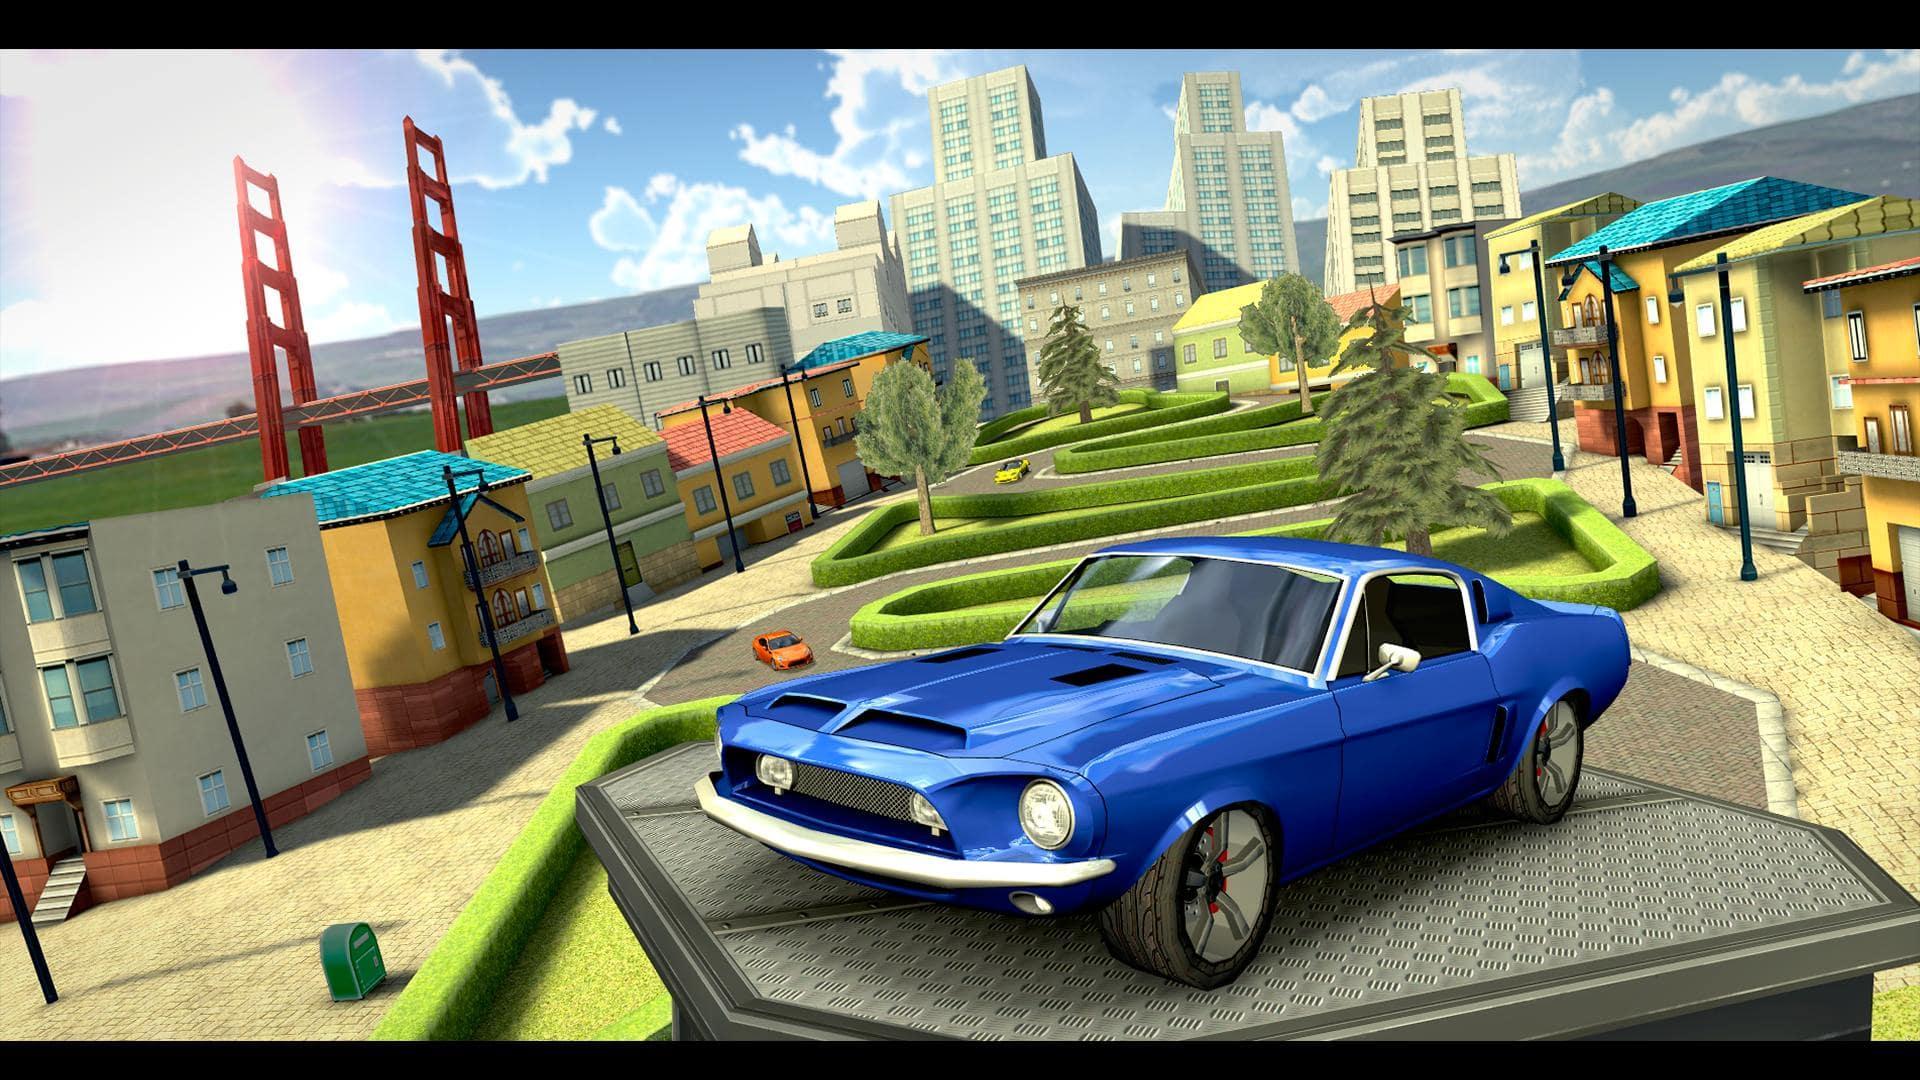 Extreme Car Driving Simulator for PC Windows 6.56.0 Download